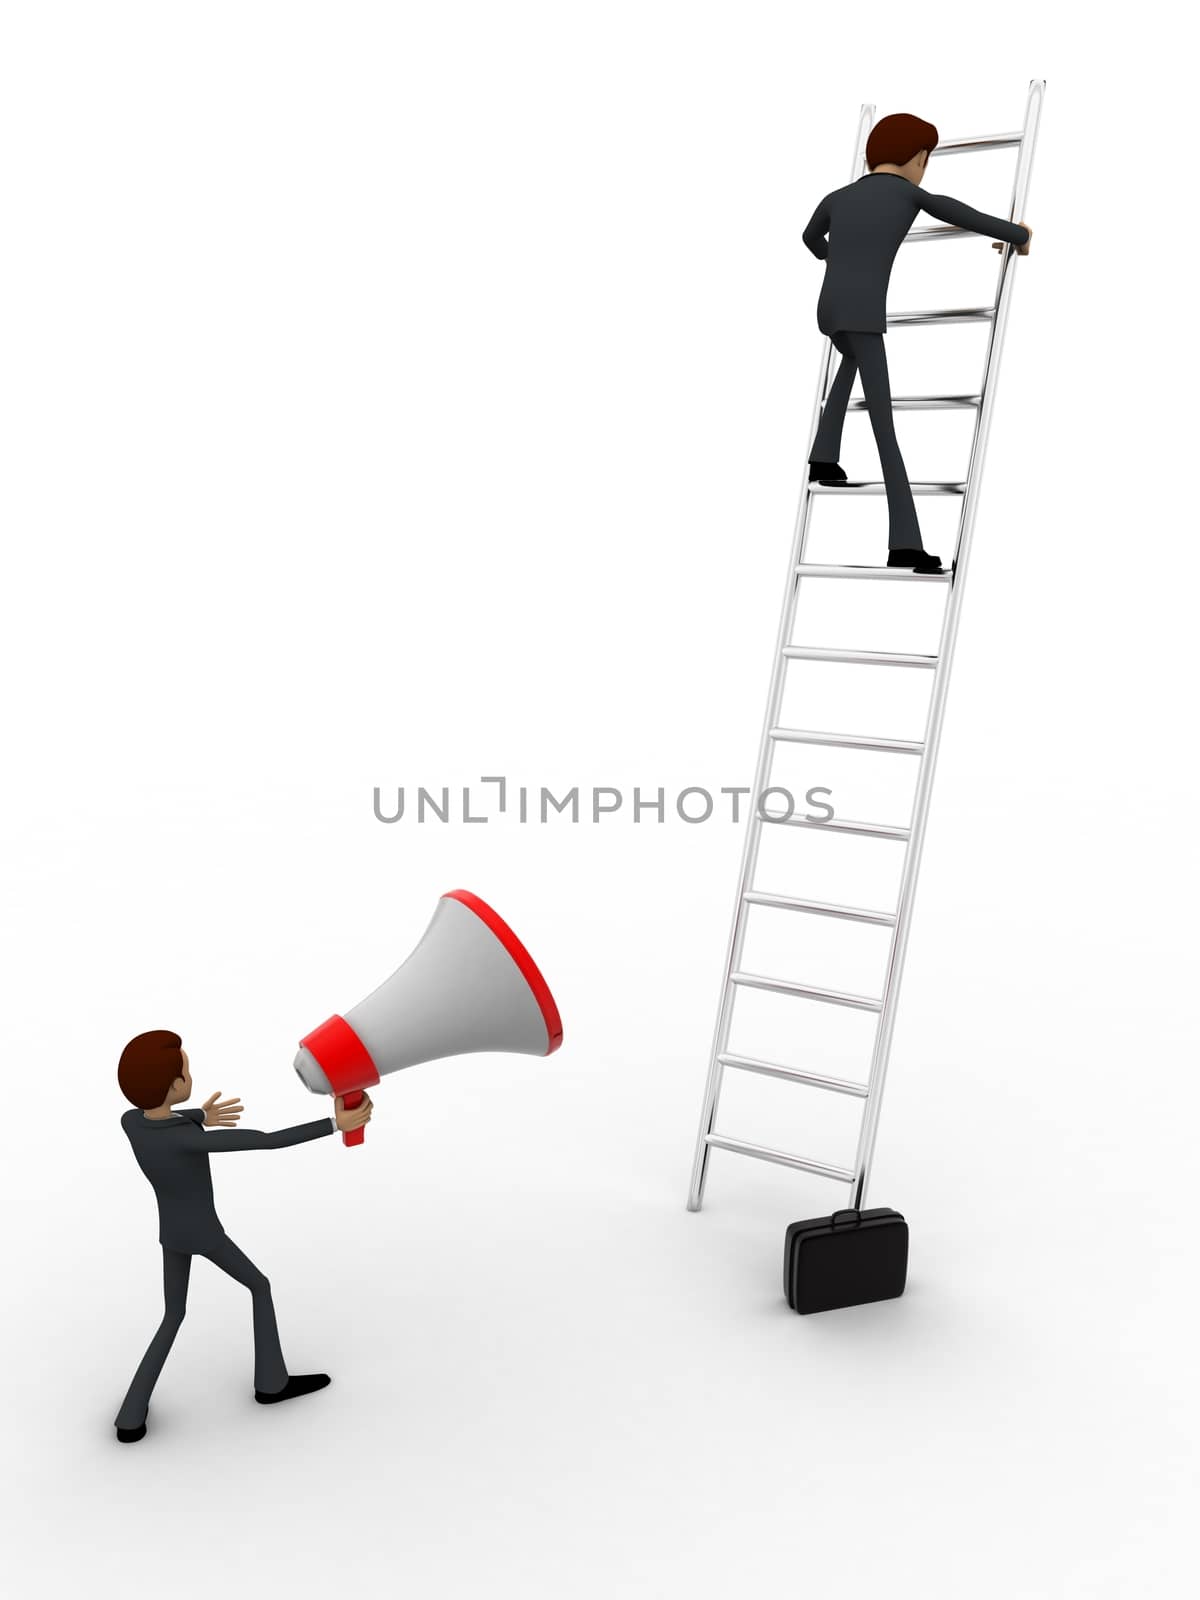 3d men climbing ladder and another announcing from mic concept on white background, side angle view